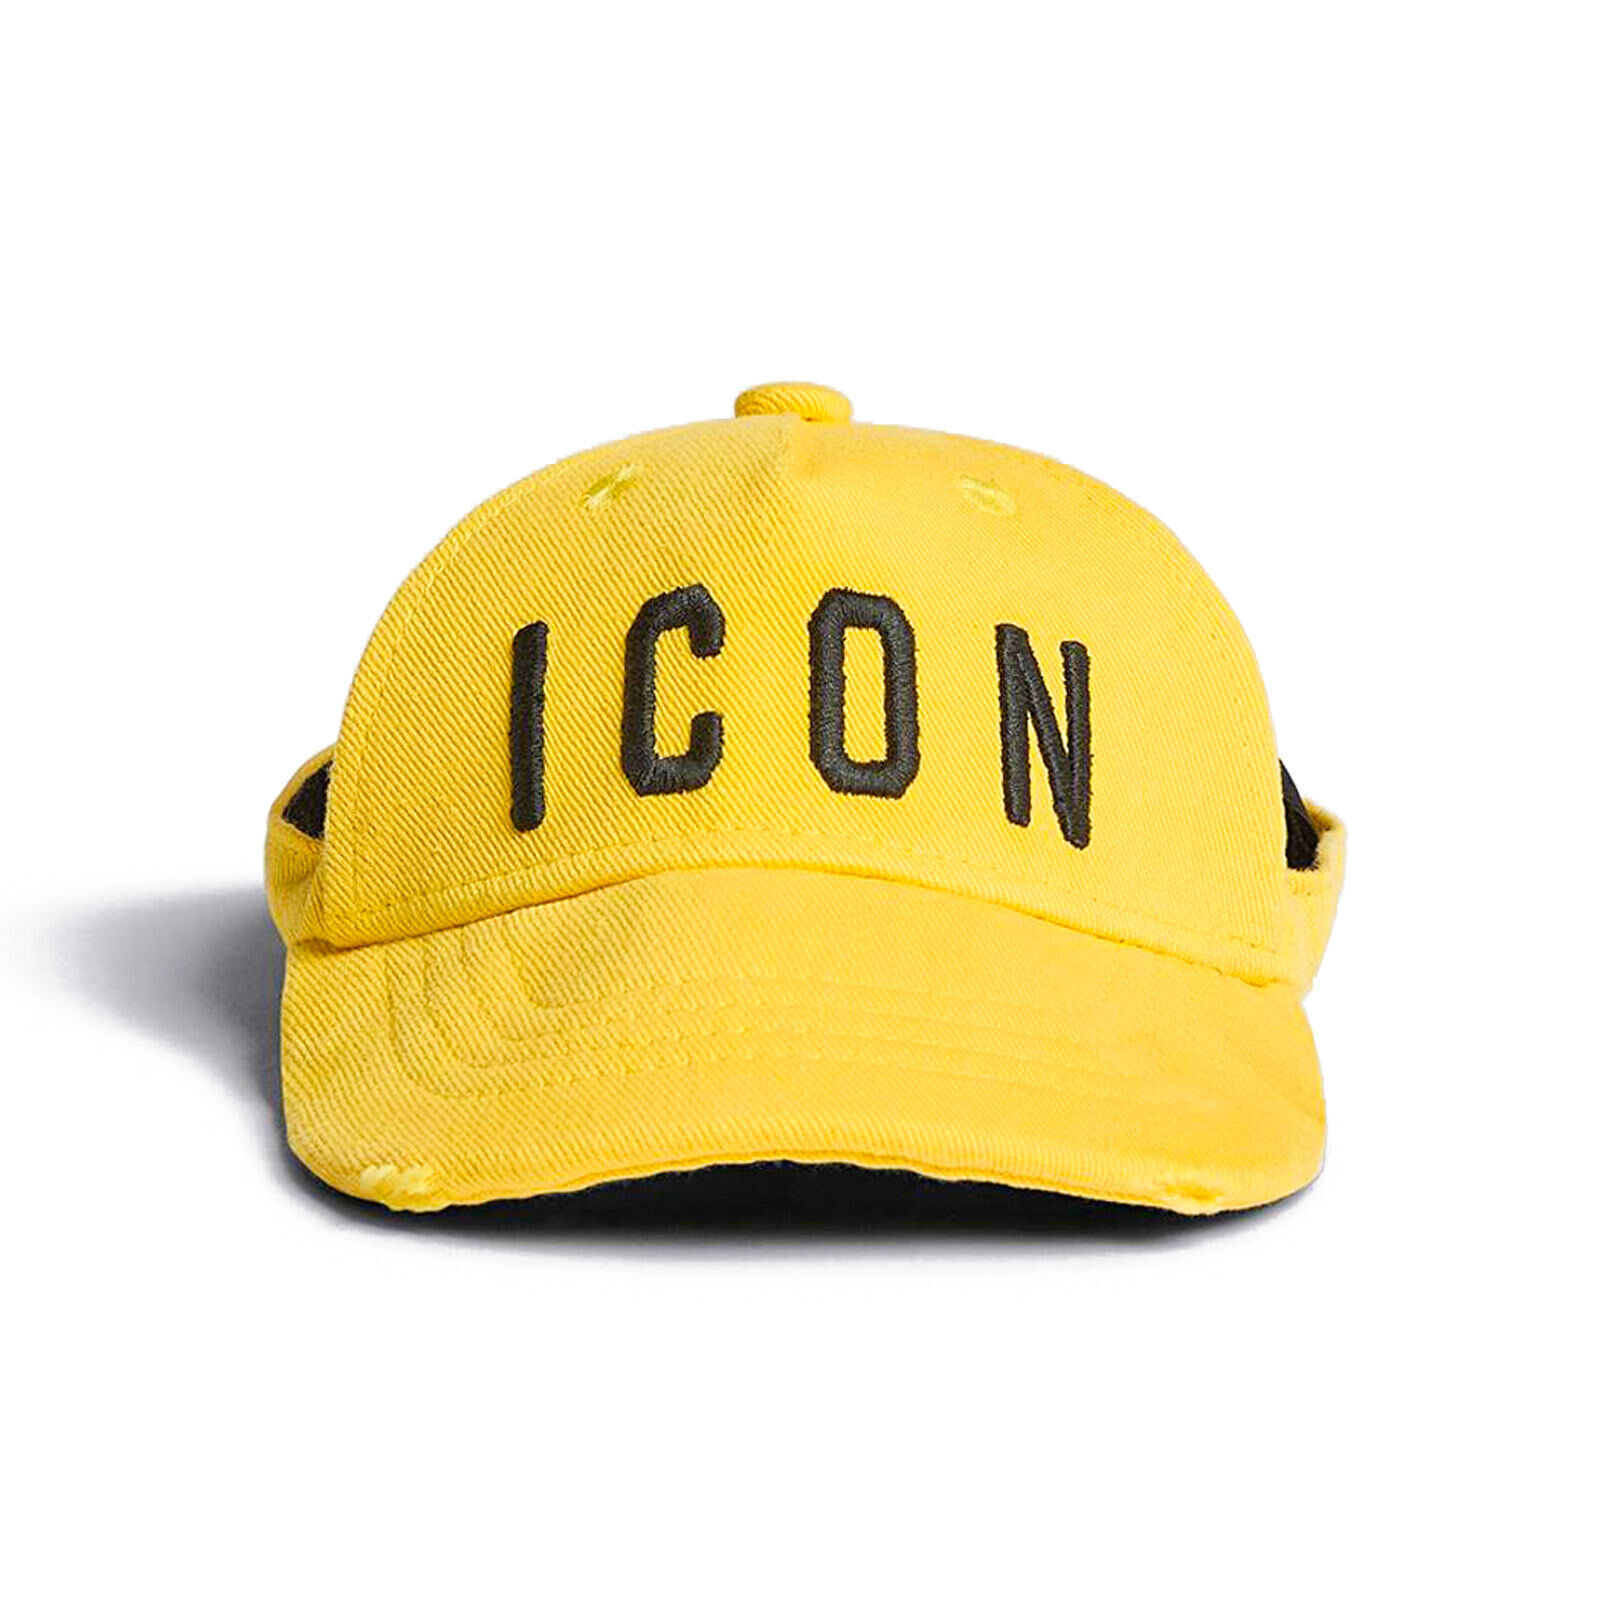 DSQUARED2 ICON yellow dog hat cap with adjustable visor